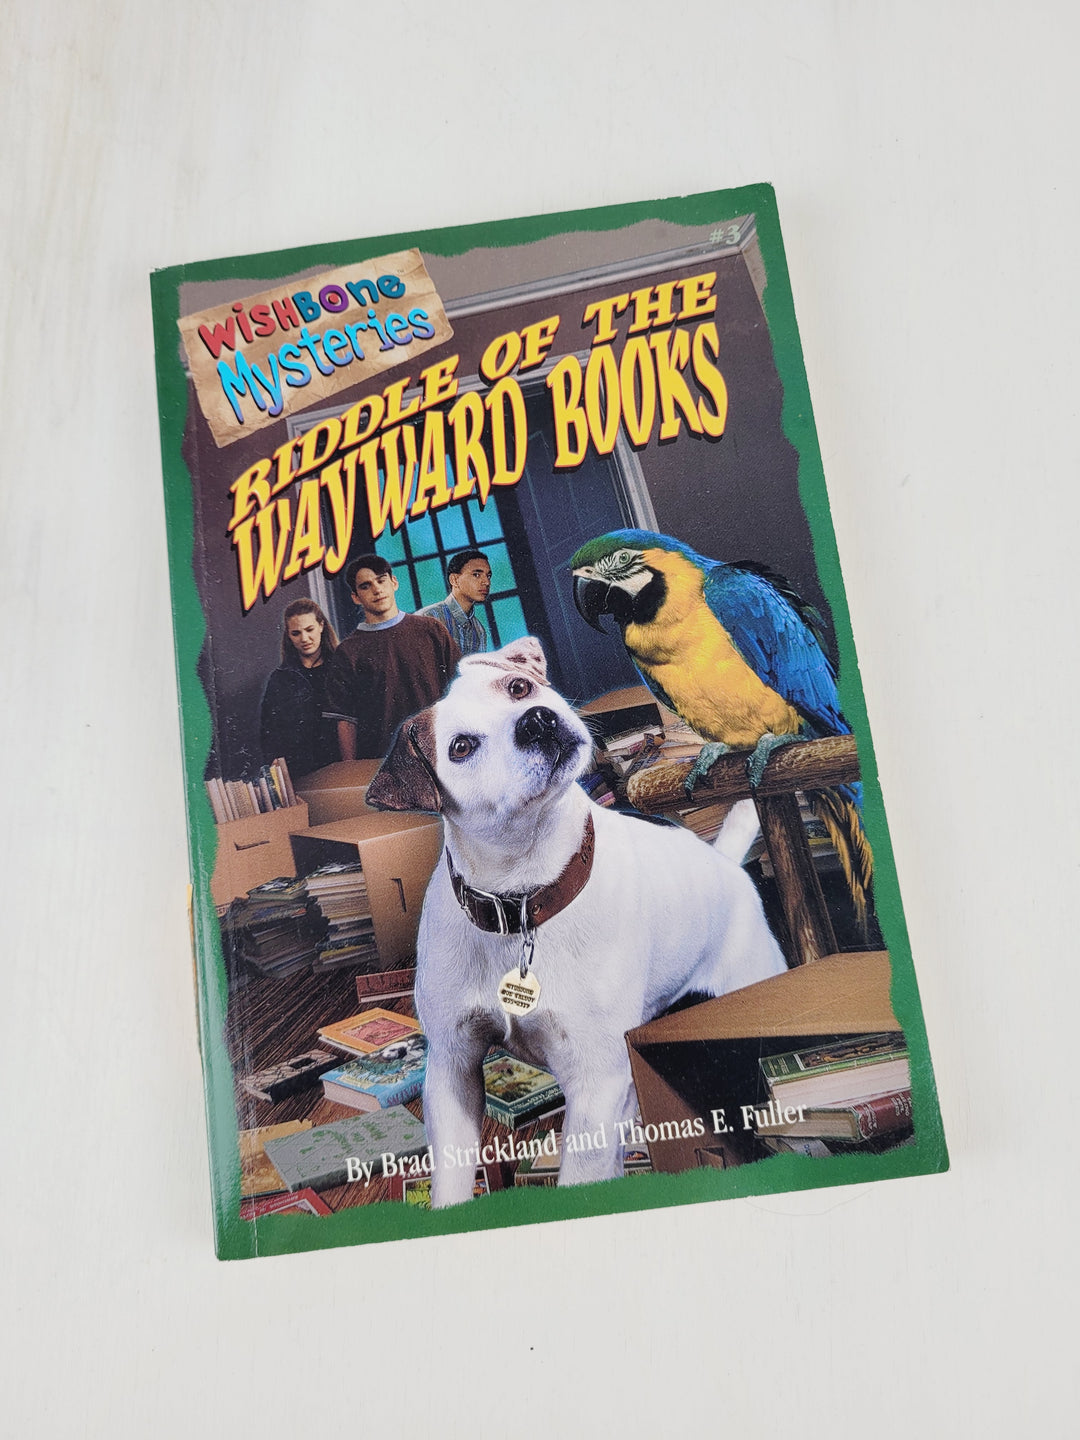 WISHBONE MYSTERIES #3 RIDDLE OF THE WAYWARD BOOKS CHAPTER BOOK EUC